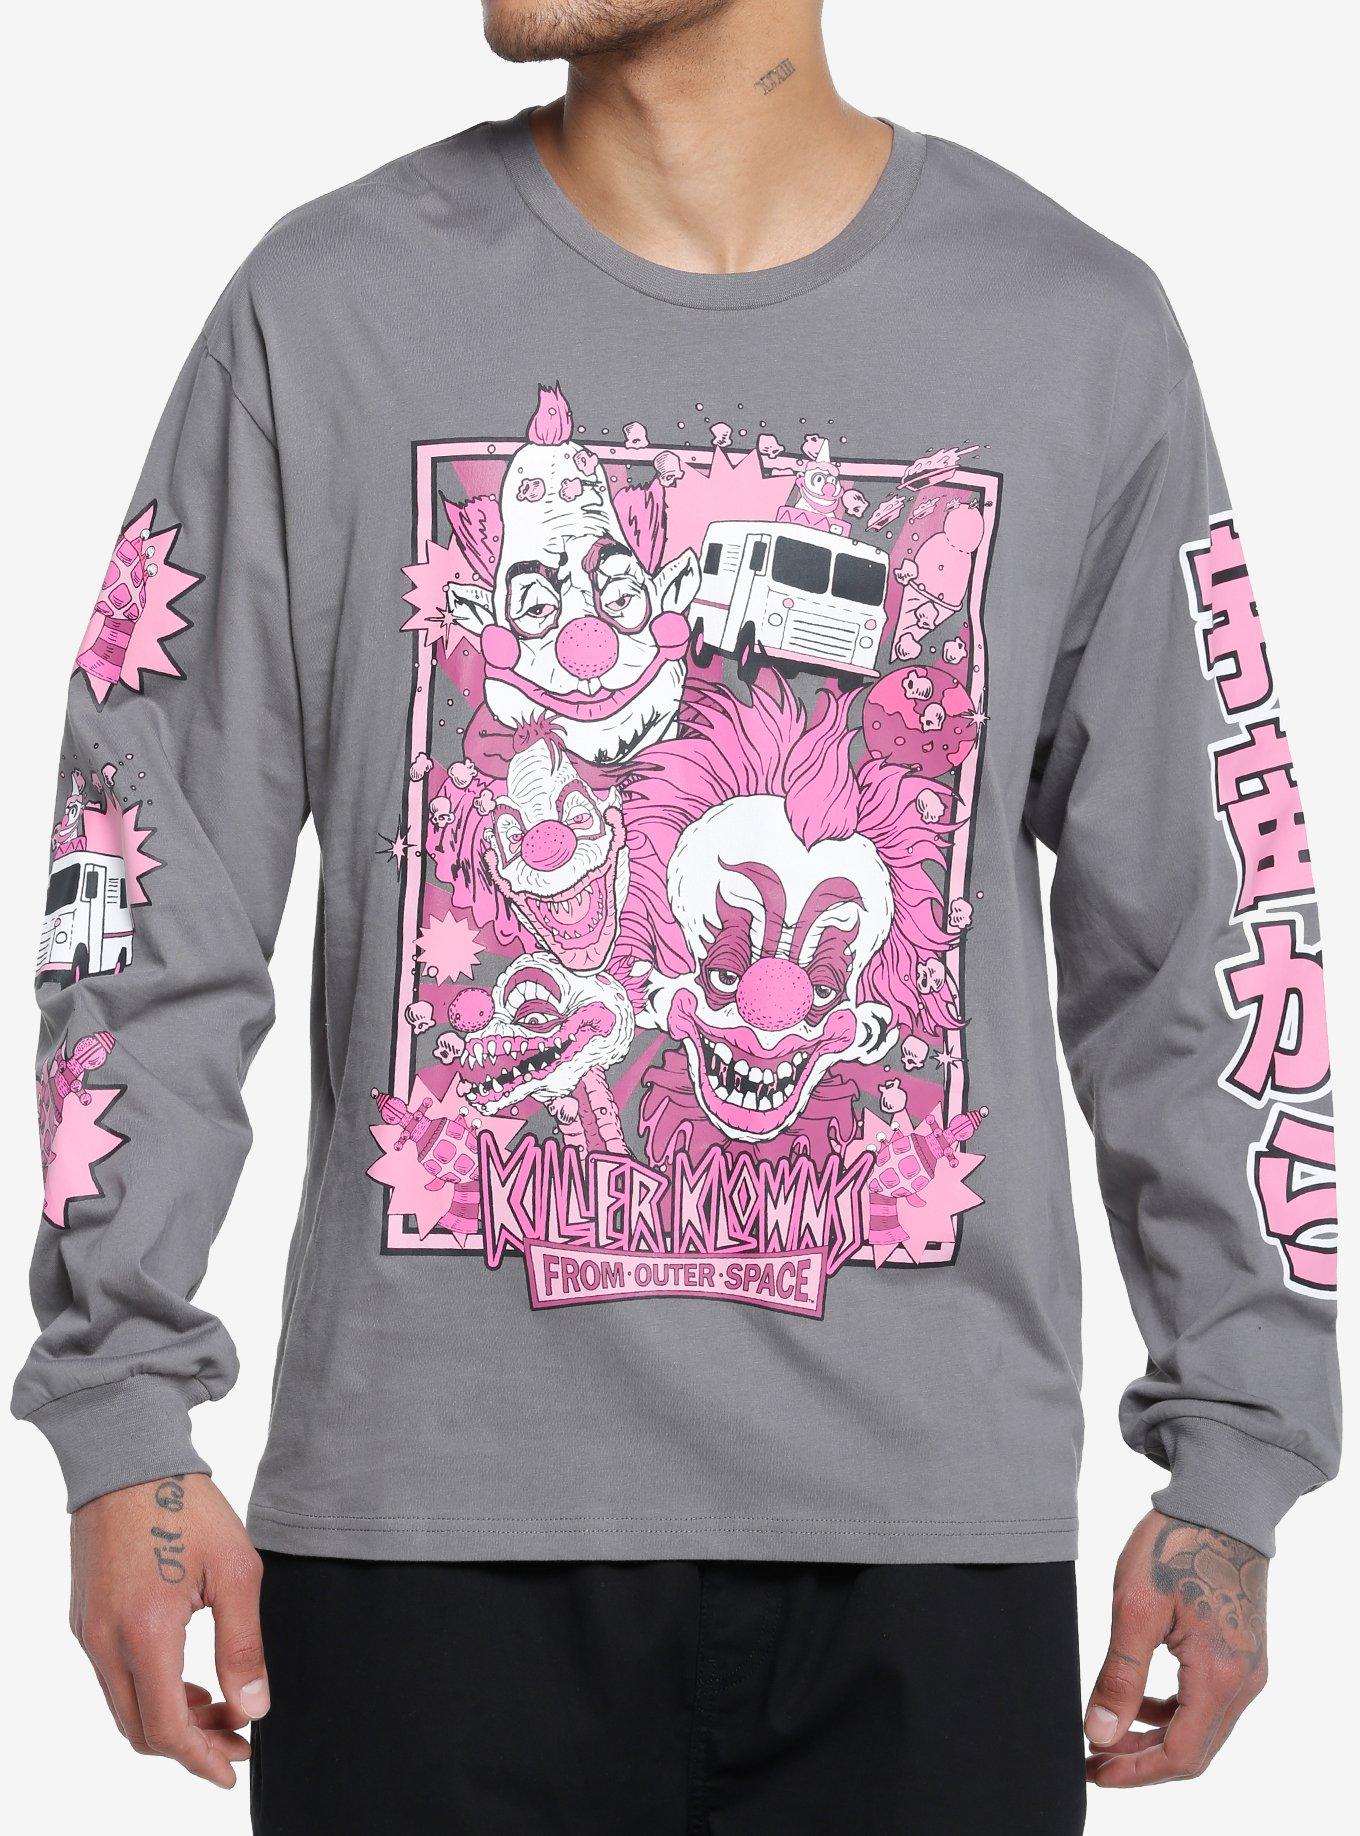 Killer Klowns From Outer Space Pink Tonal Long-Sleeve T-Shirt, GREY, hi-res